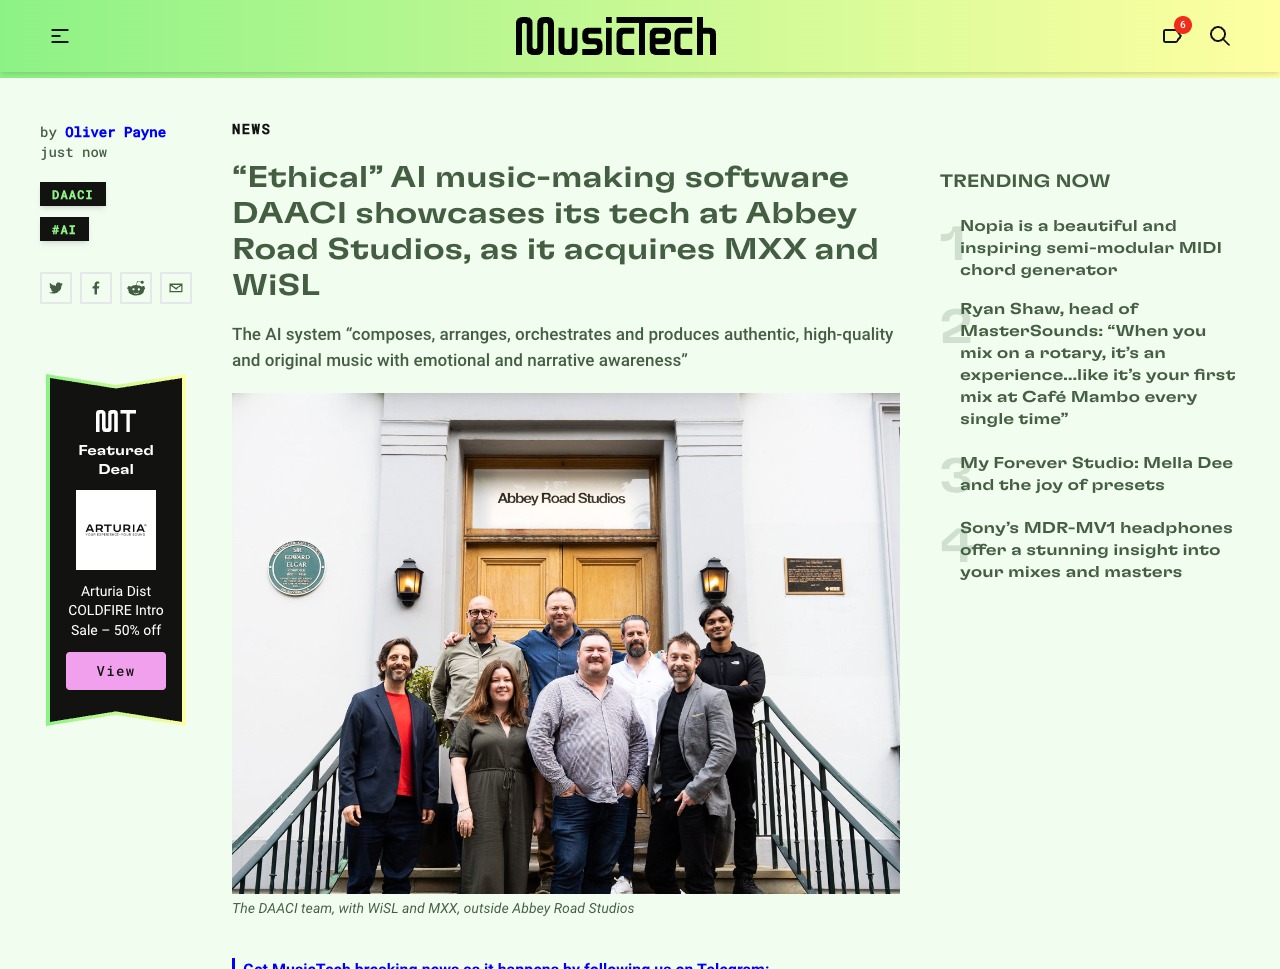 “Ethical” AI music-making software DAACI acquires MXX and WiSL